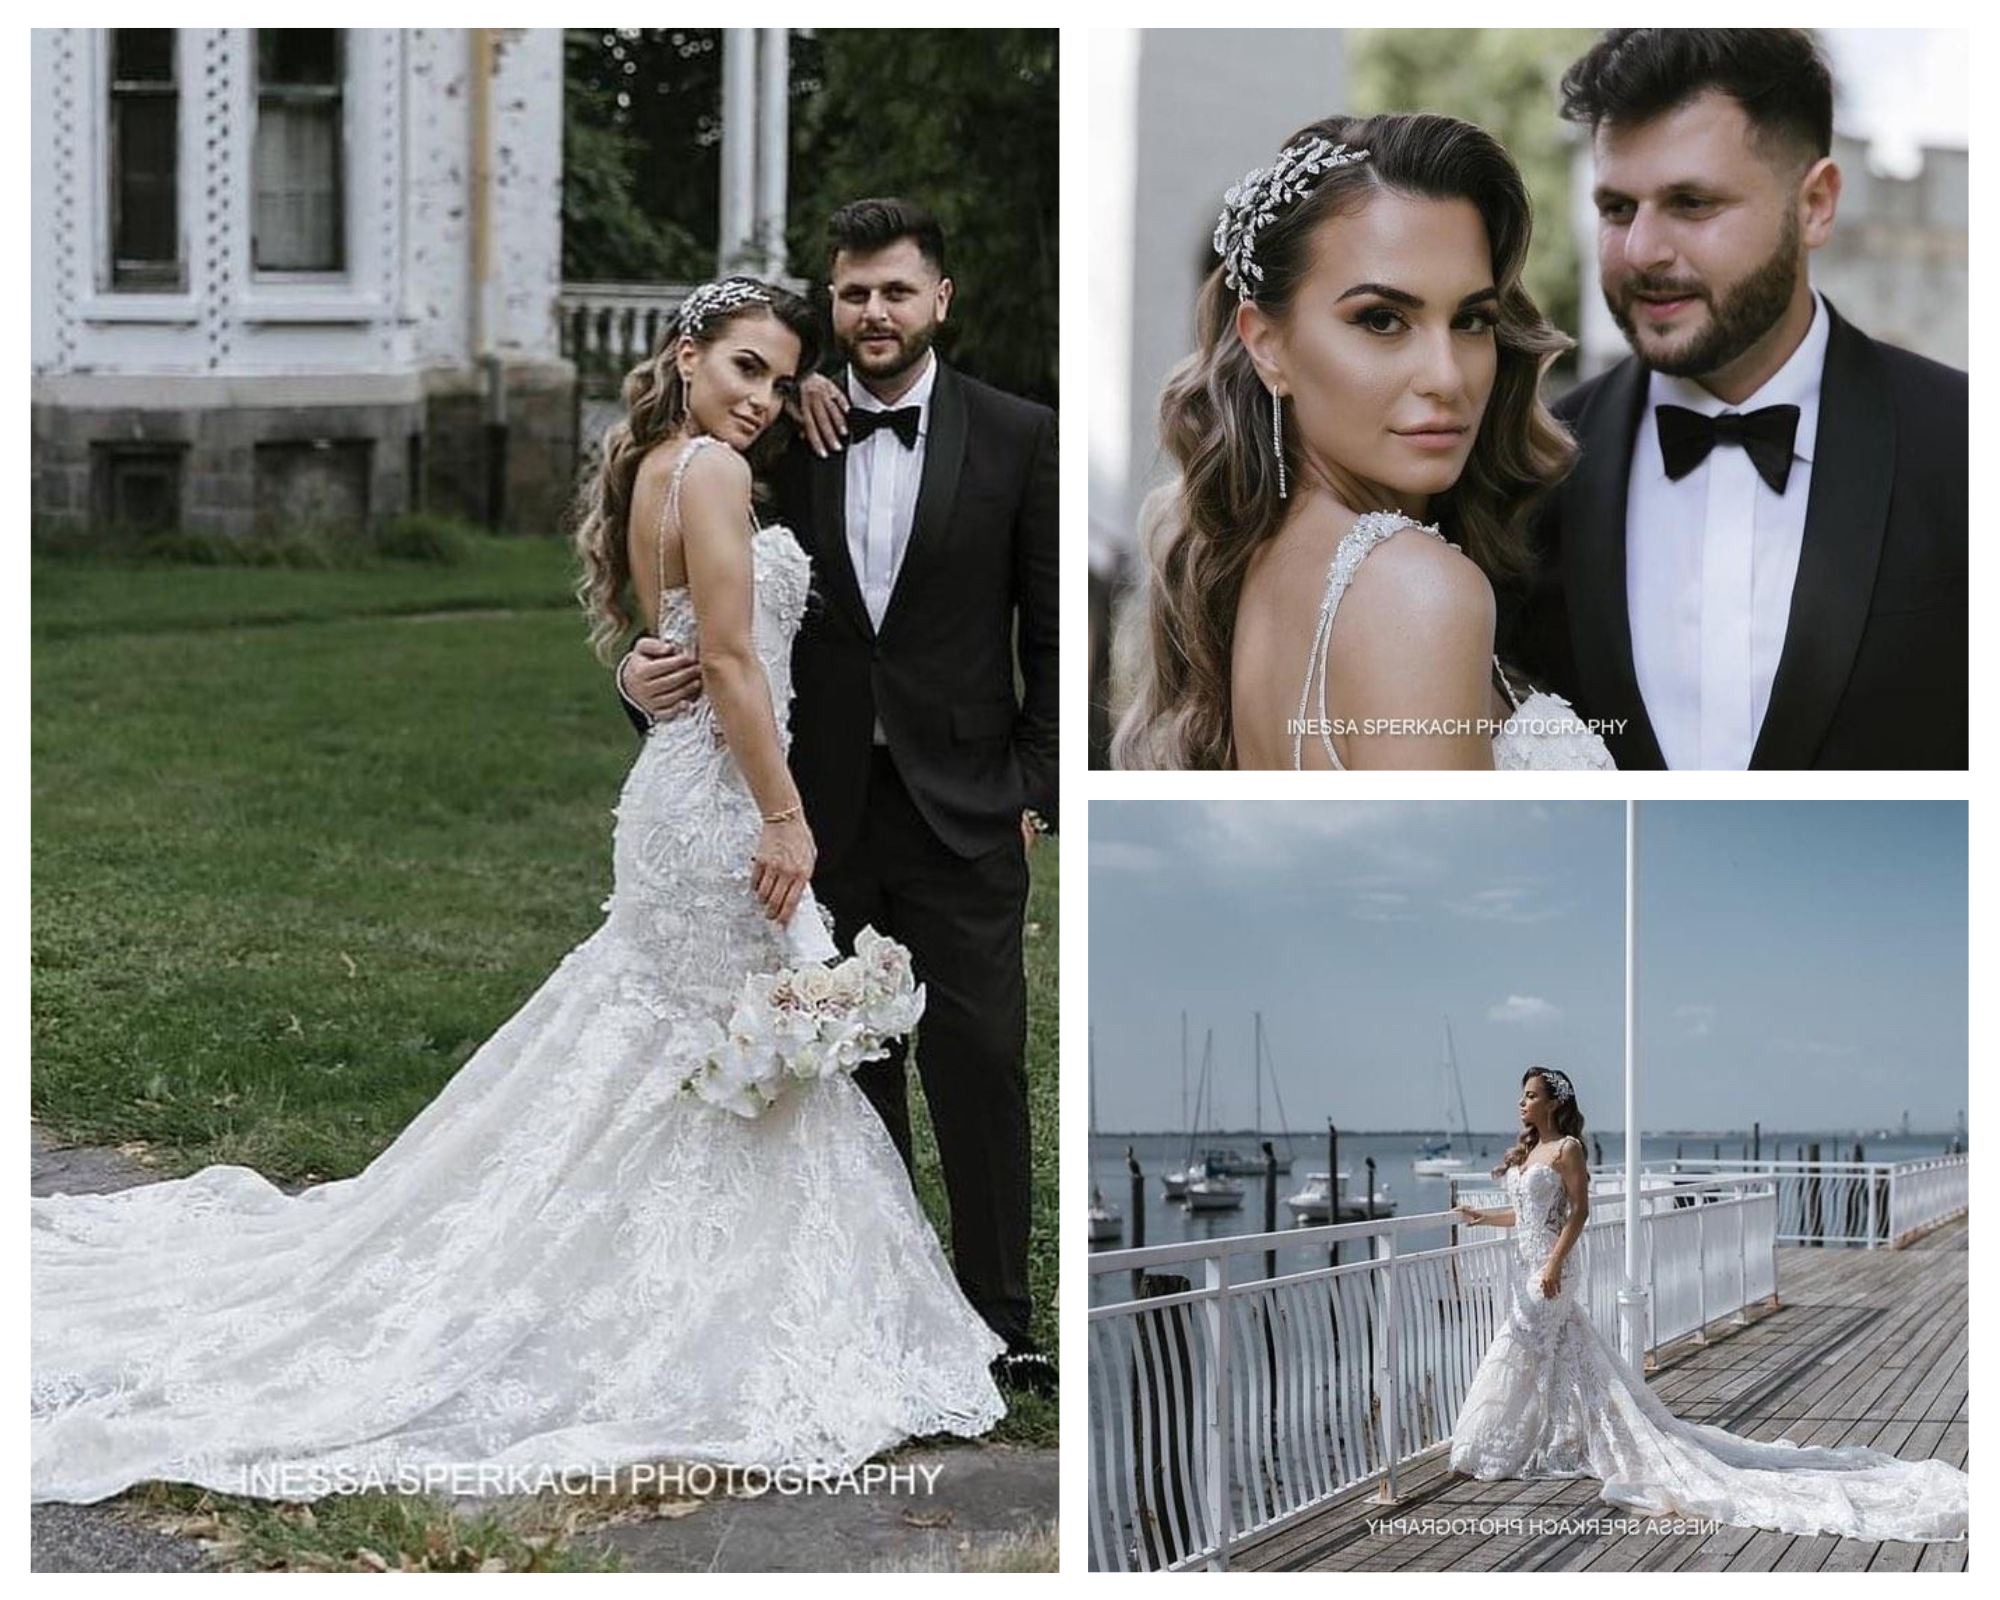 Images of our bride in her wedding gown and wearing her custom Swarovski crystal rose comb created by Bridal Styles Boutique.